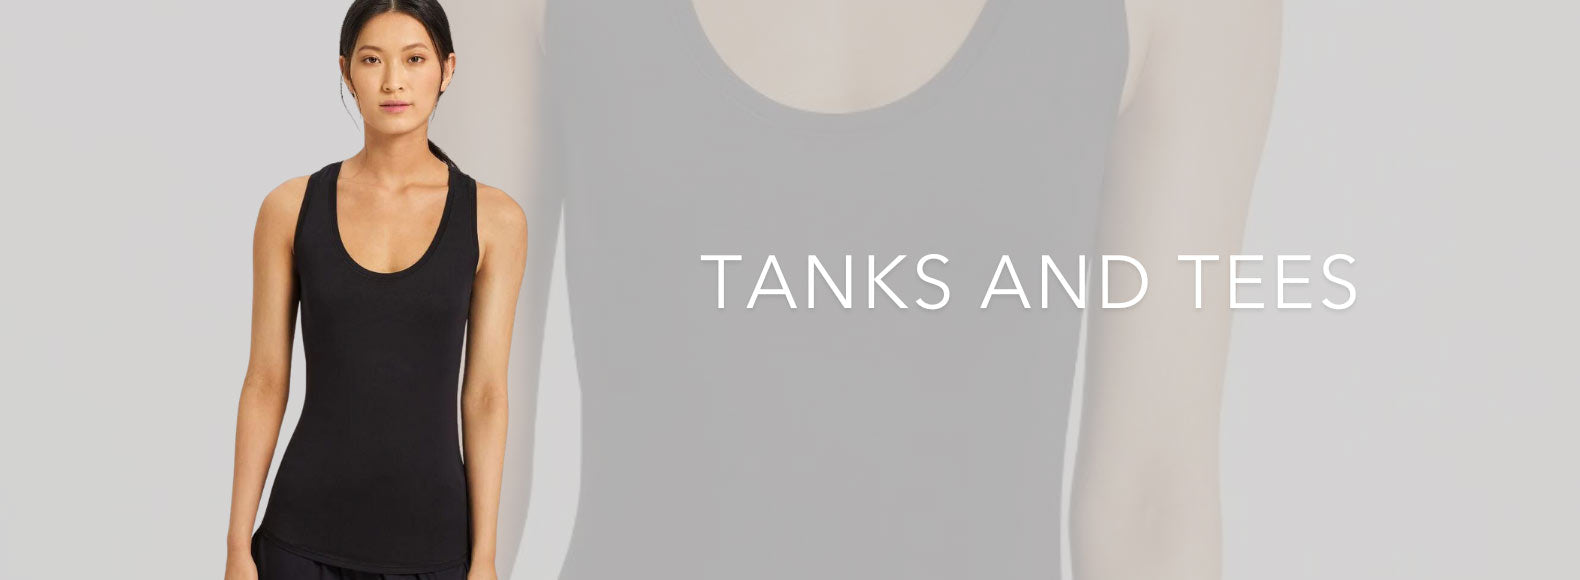 Tank Tops & Tees for Women Sleepwear Collections